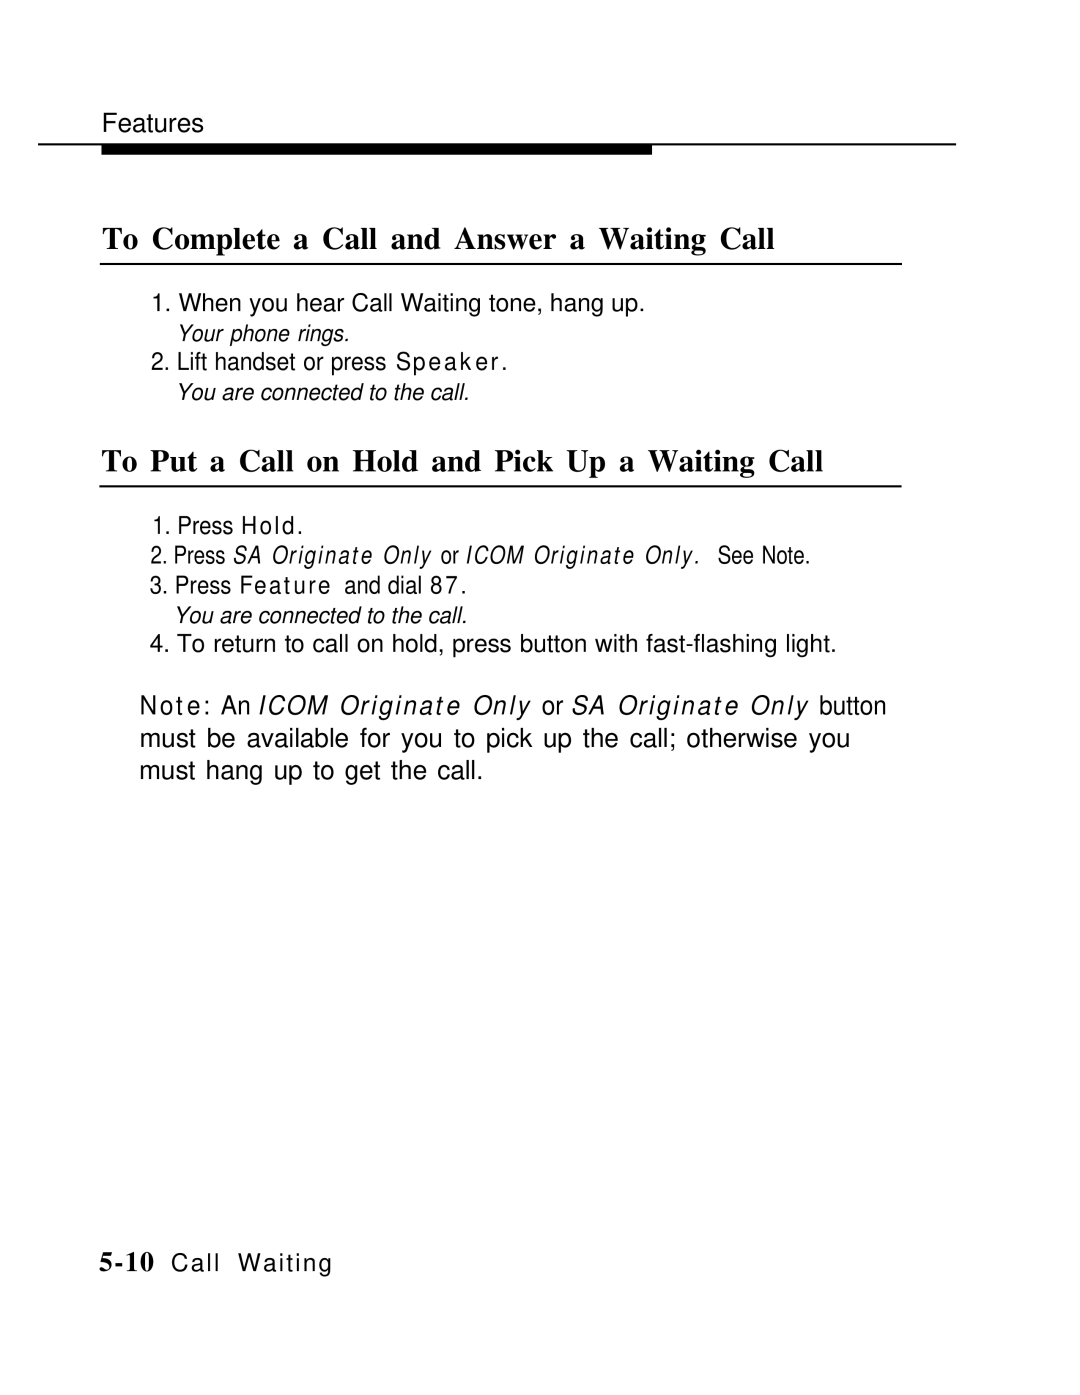 AT&T MLX-10 manual To Complete a Call and Answer a Waiting Call, To Put a Call on Hold and Pick Up a Waiting Call 